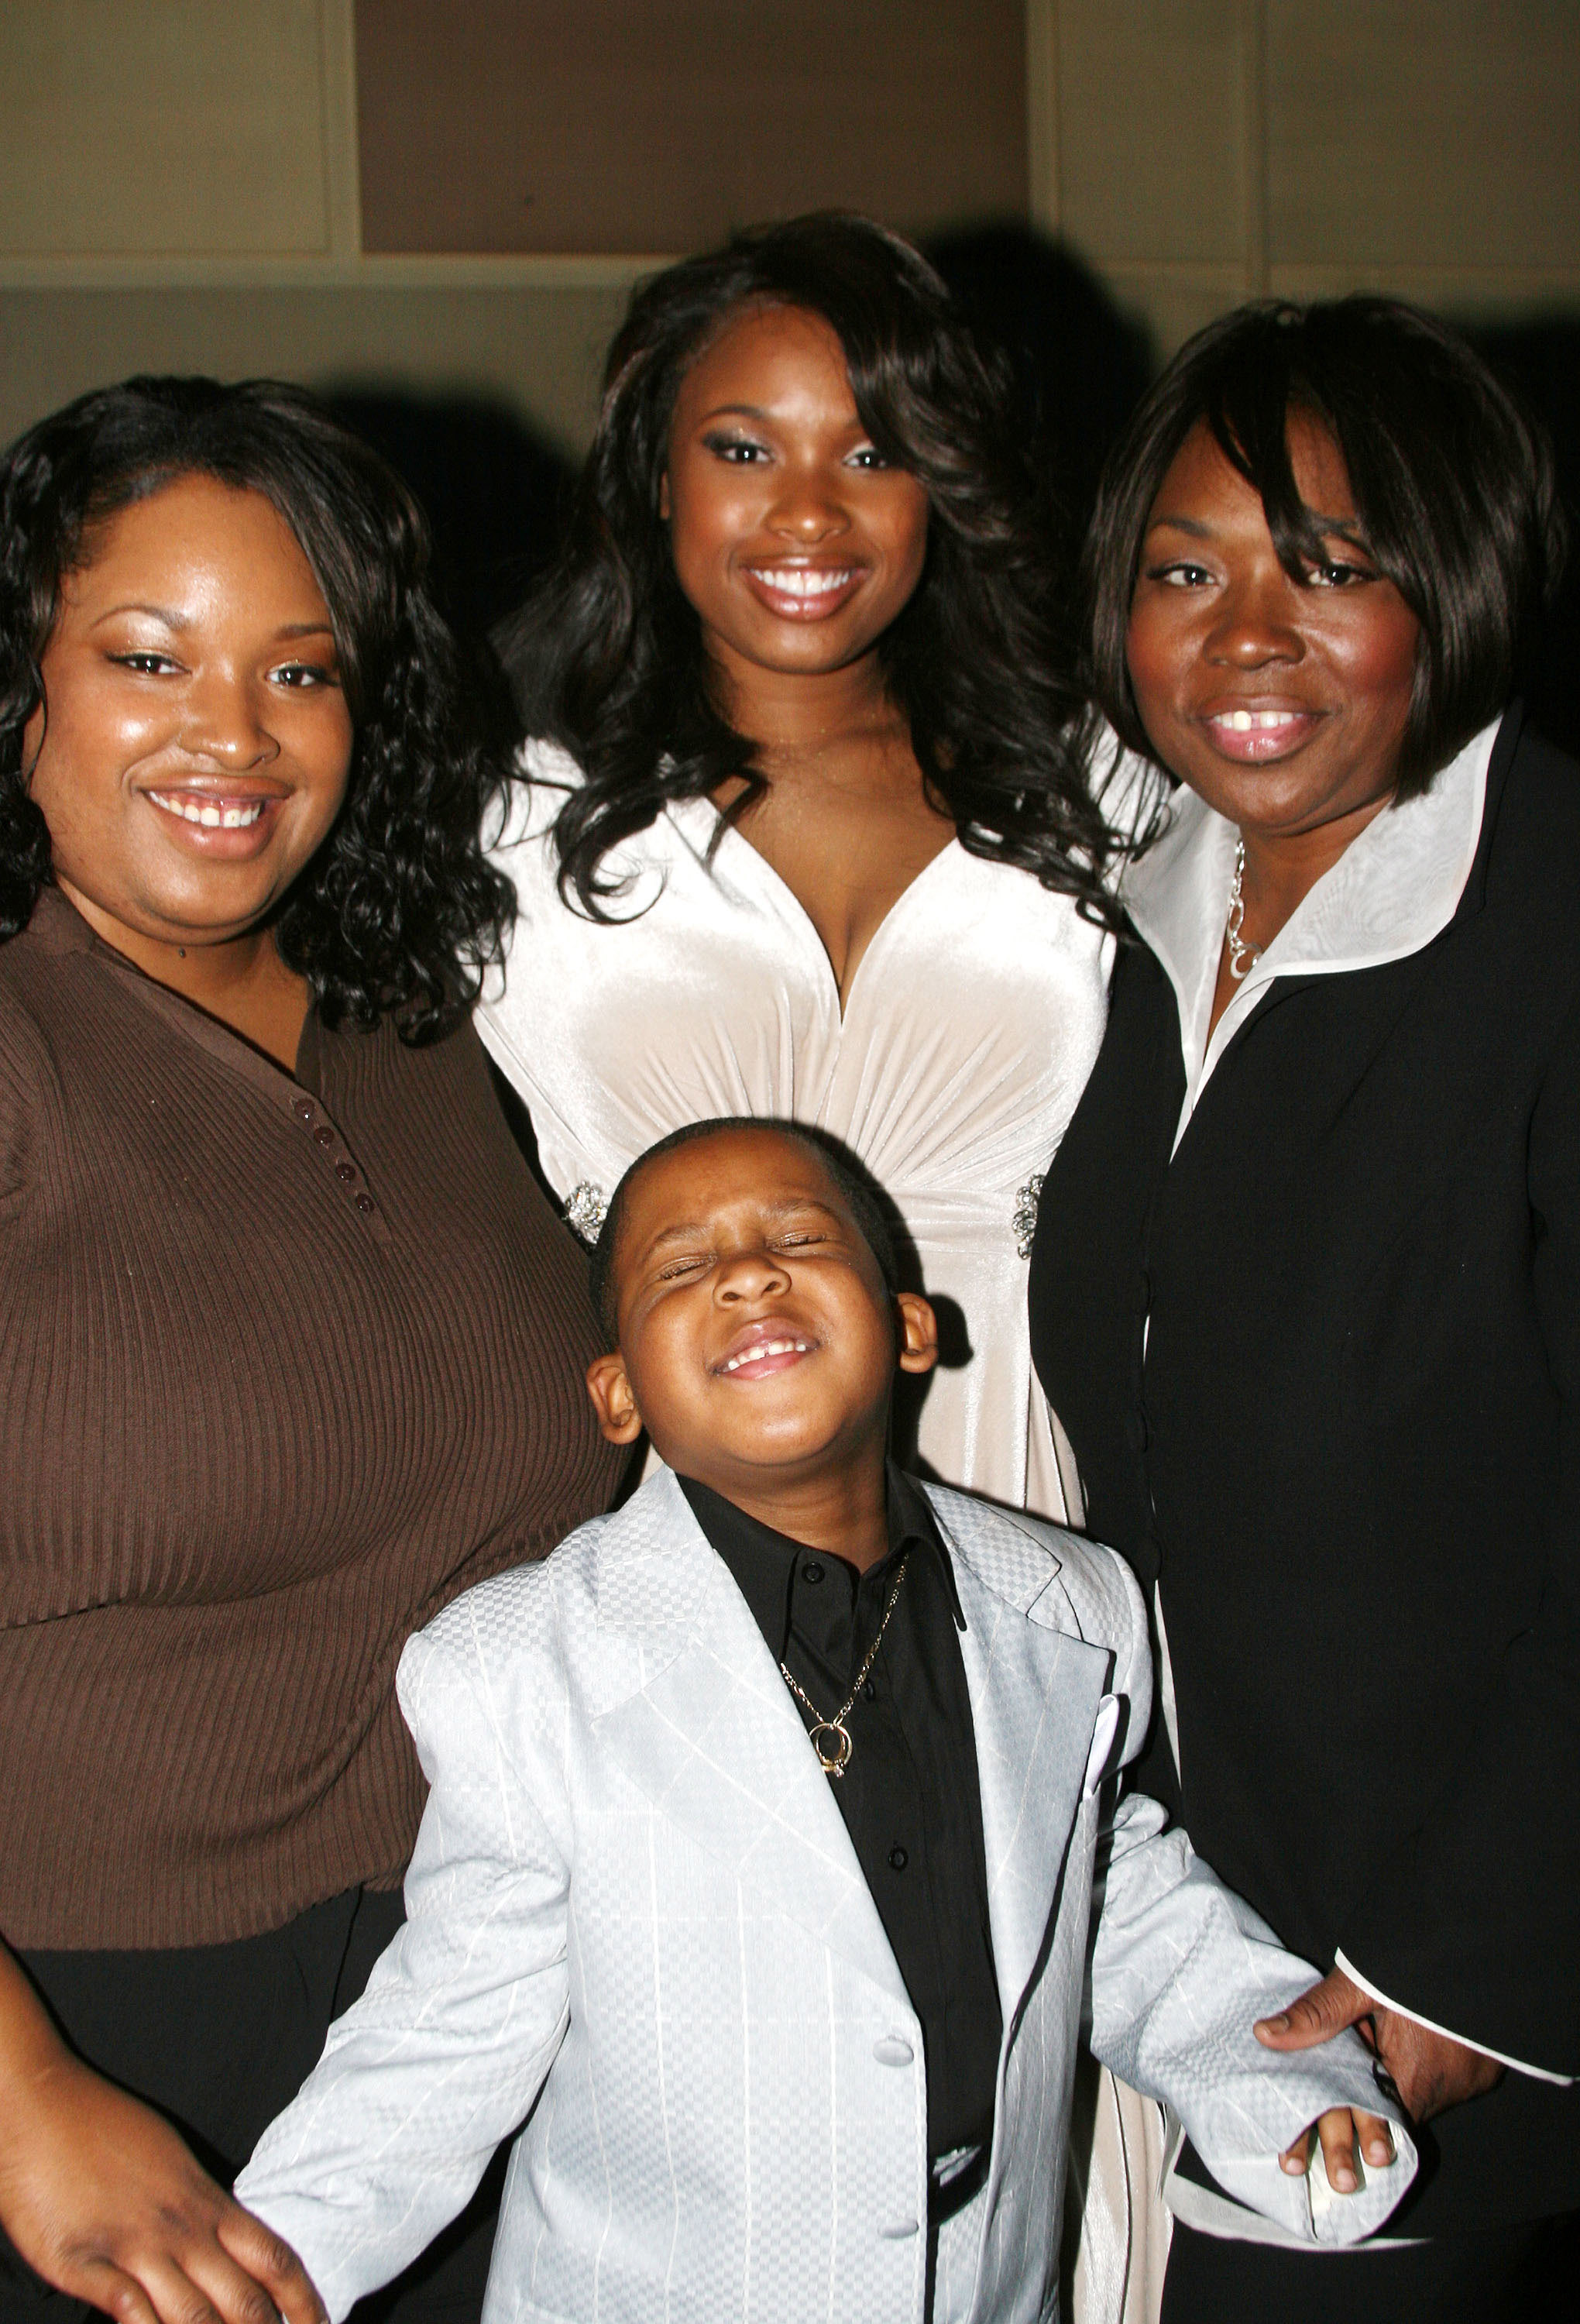 Jennifer Hudson beside her sister Julia Hudson, mother Darnell Donerson, and nephew Julian King at the "Dreamgirls" New York premiere in 2006 | Source: Getty Images